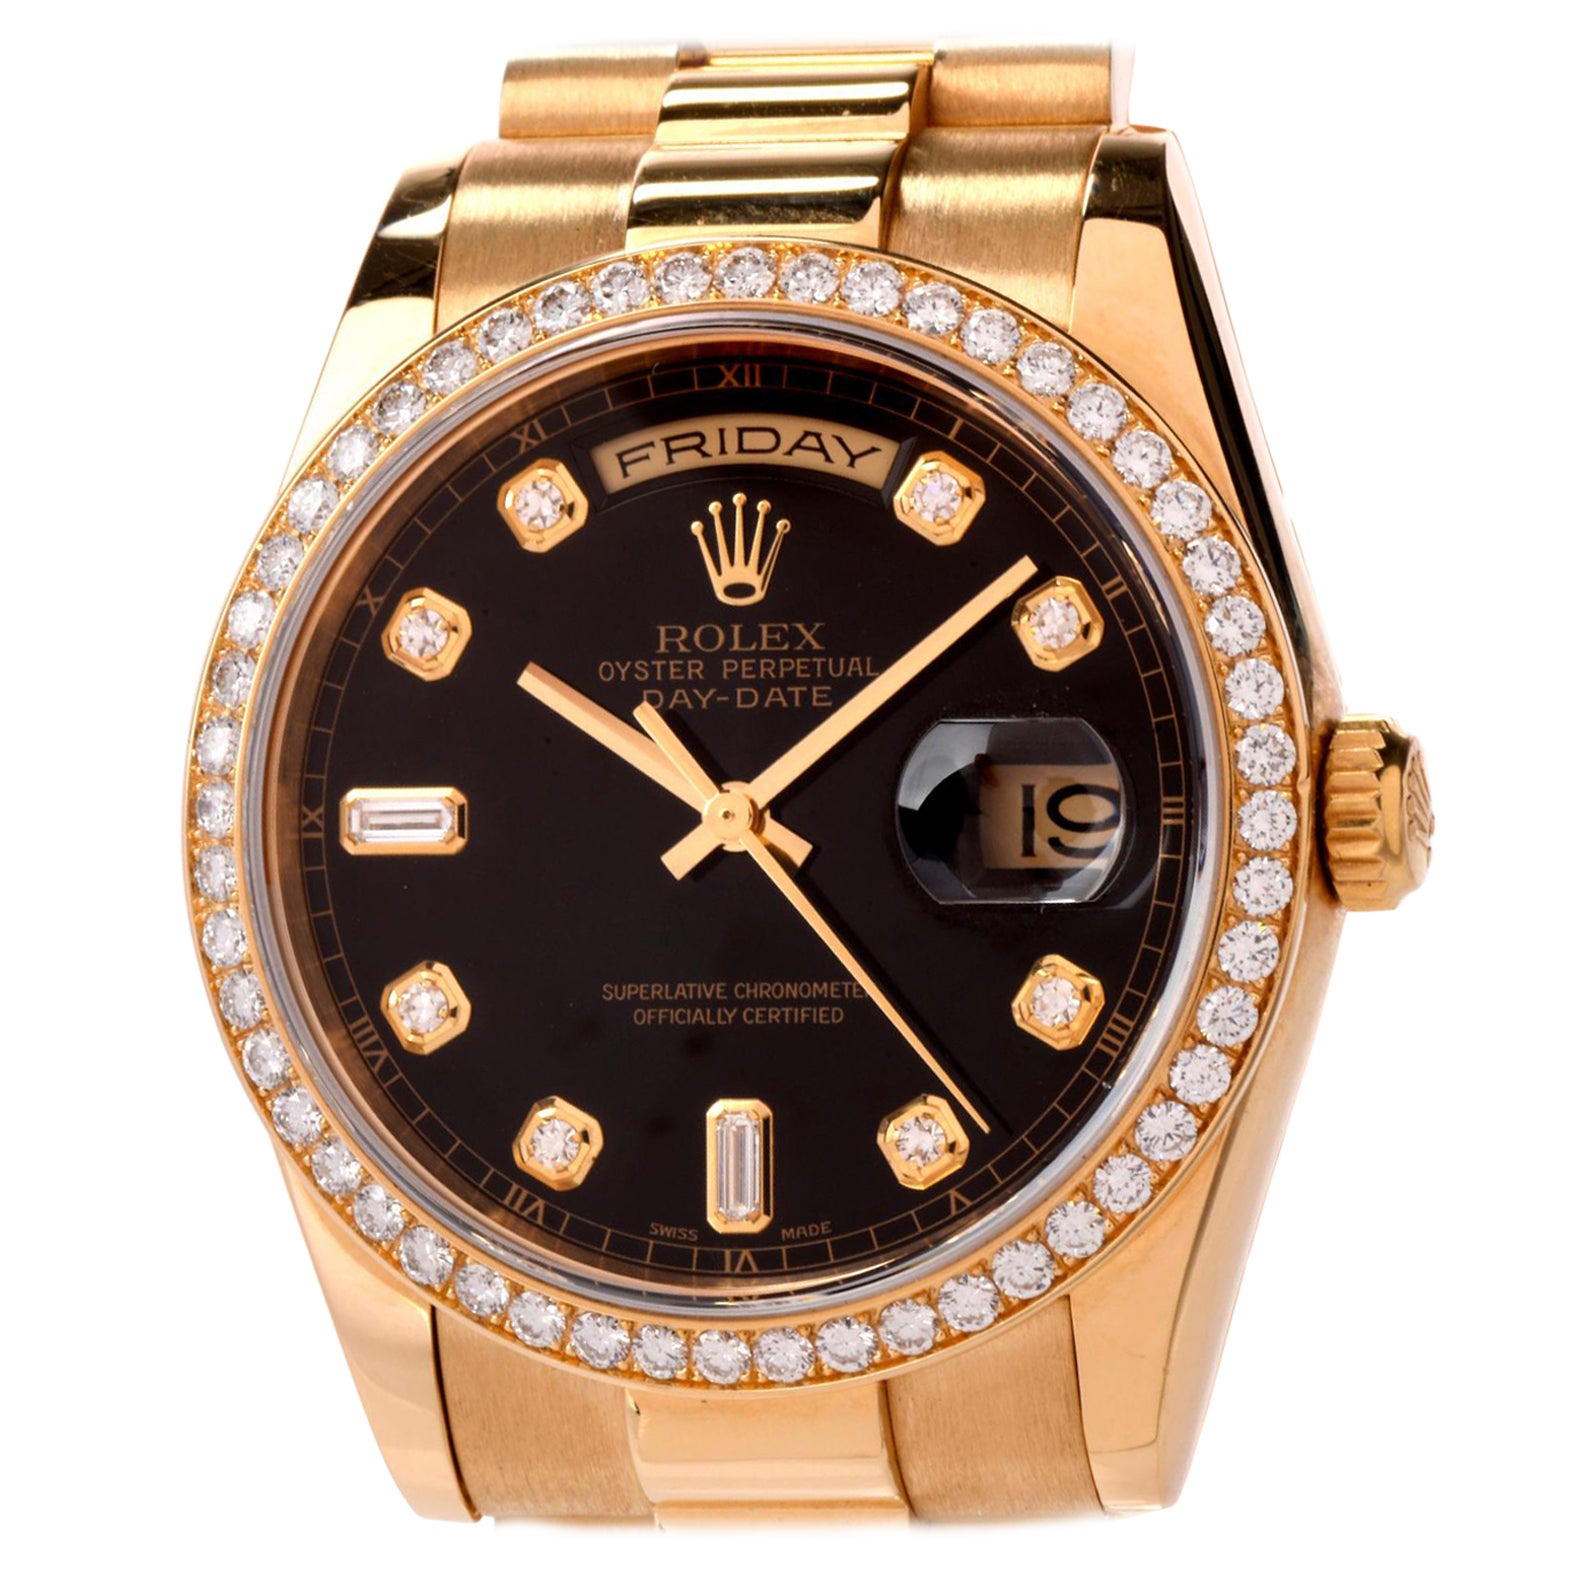 This Exquisite  36mm Collectible Gentlemen's Rolex is cast in 18K yellow gold and remains in Pristine Condition. 

Reference number 118348.

 Features ALL ORIGINAL Scratch resistant mineral crystal, black enamel diamond

dial, gold markers, day and